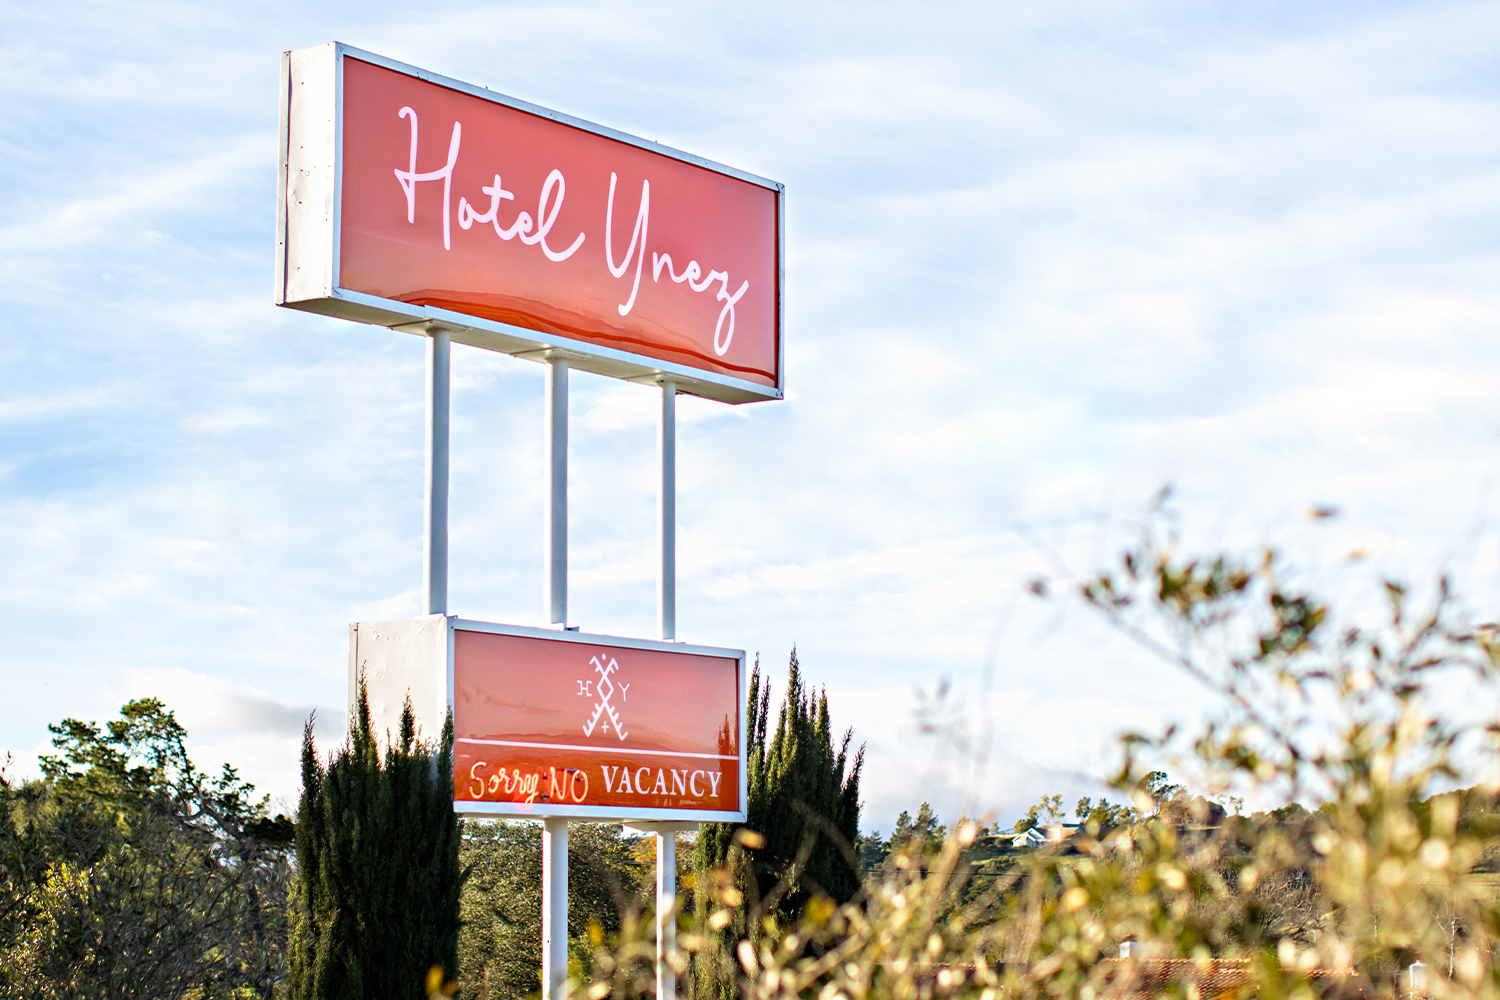 Review: Hotel Ynez Is a Secluded Bungalow Retreat in the Middle of Wine Country